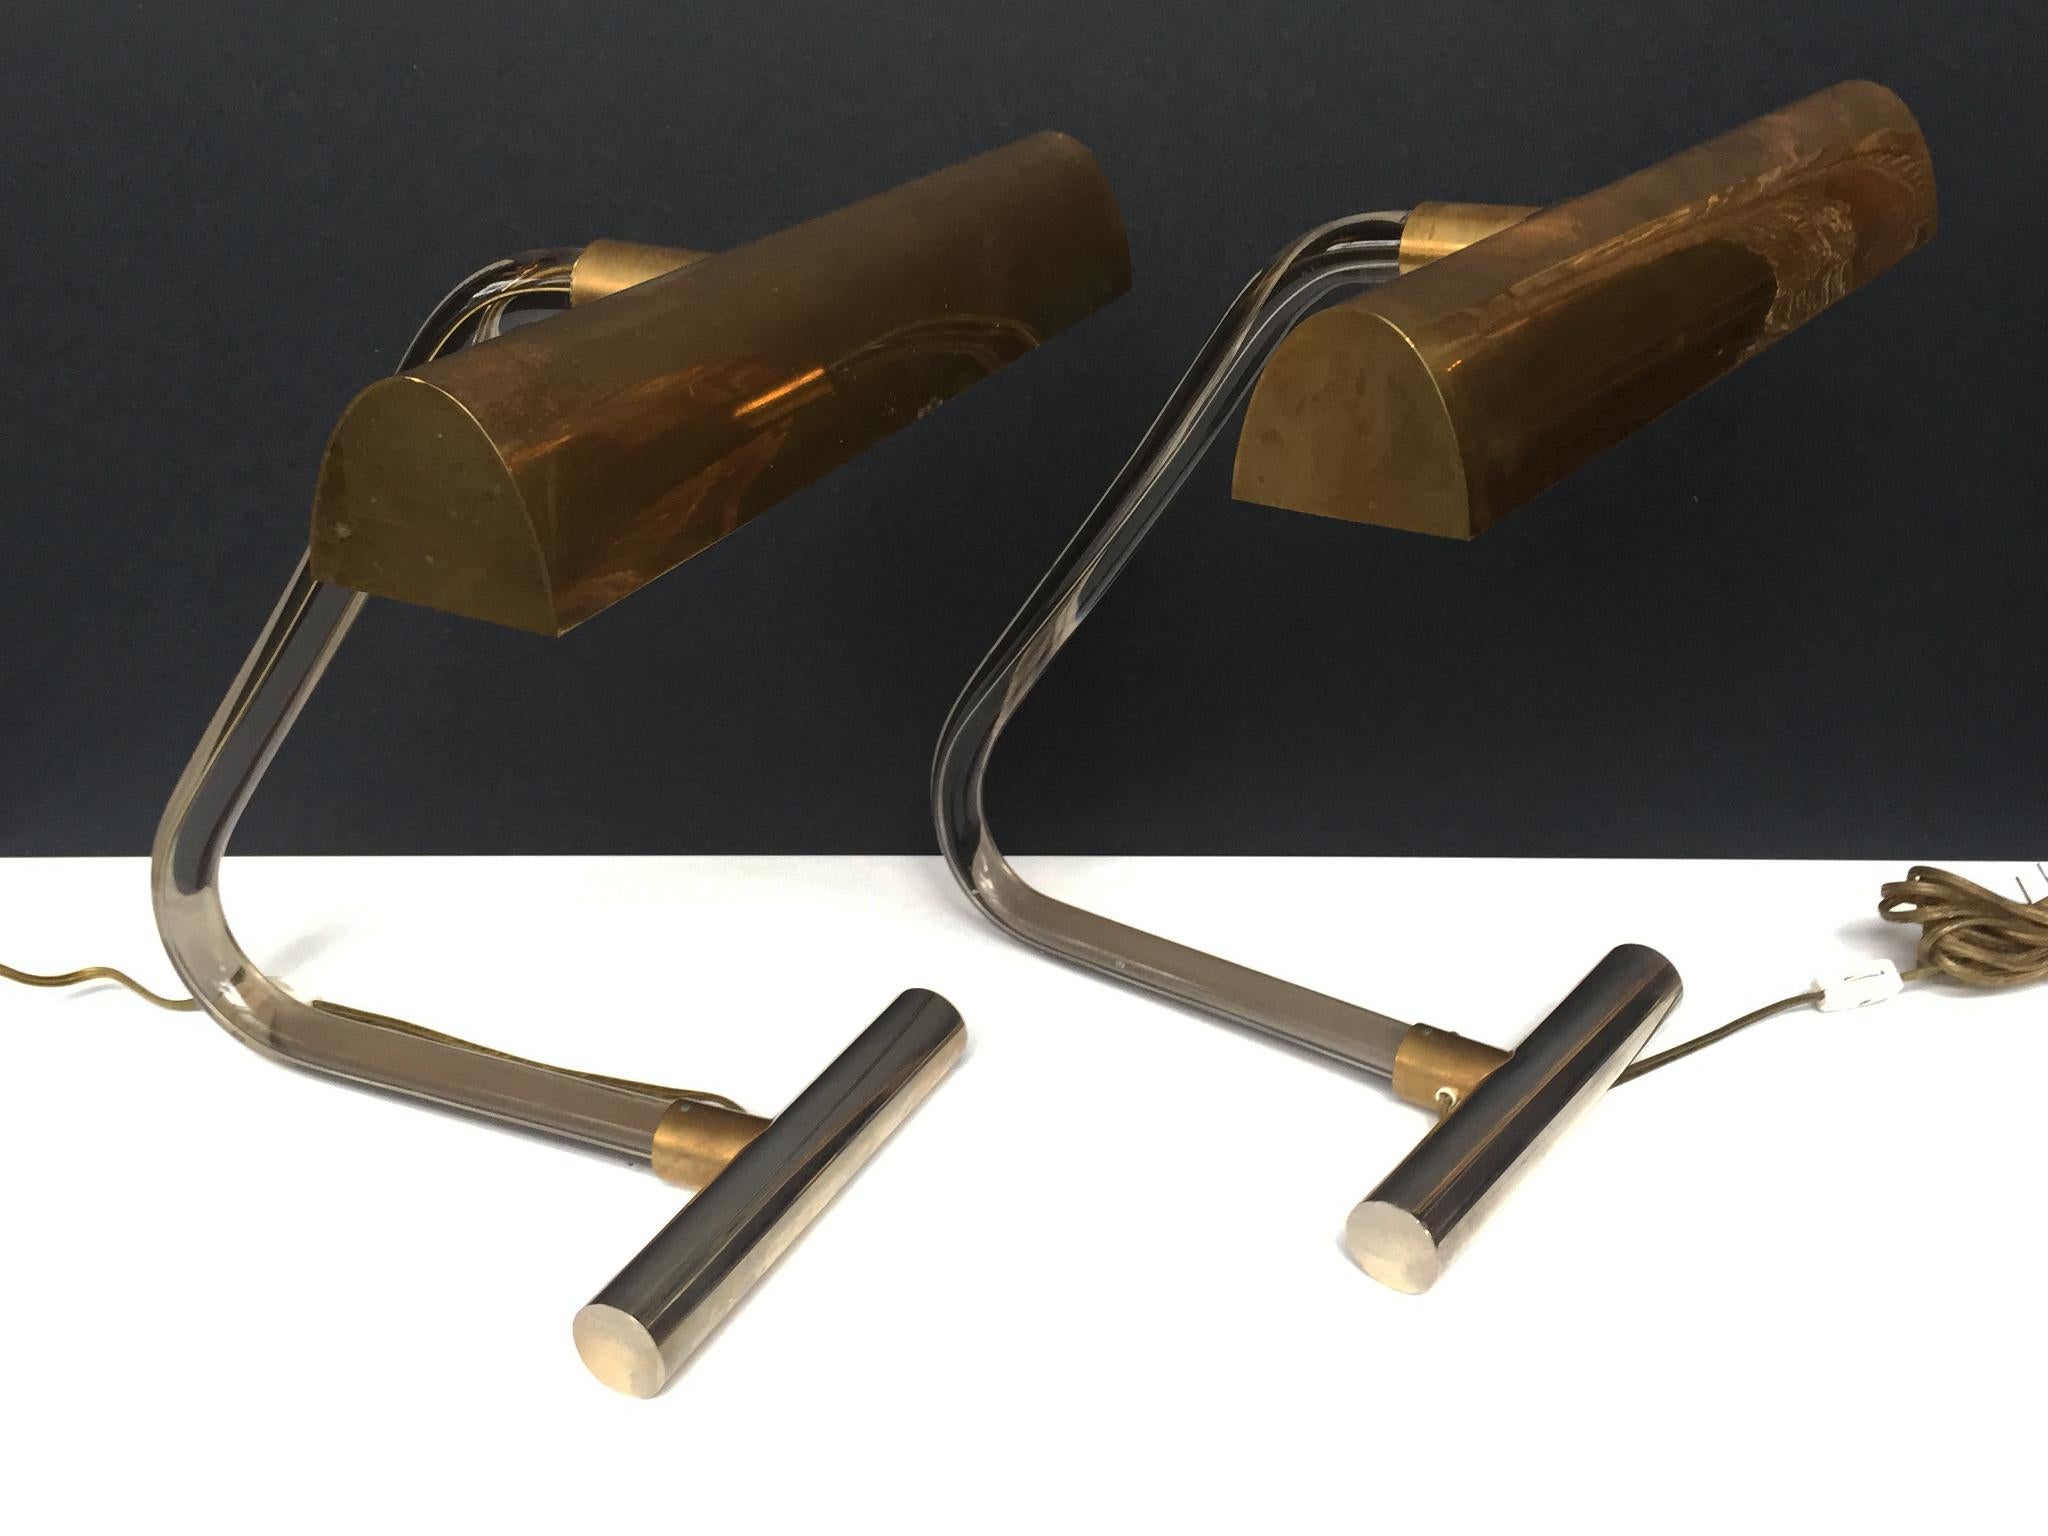 These 1970s luxe desk lamps were designed by Peter Hamburger and manufactured by George Kovacs as part of the Crylicord collection. They are comprised of smoked Lucite stems, brass shades, and chrome counterweight bases. With their balance of smooth